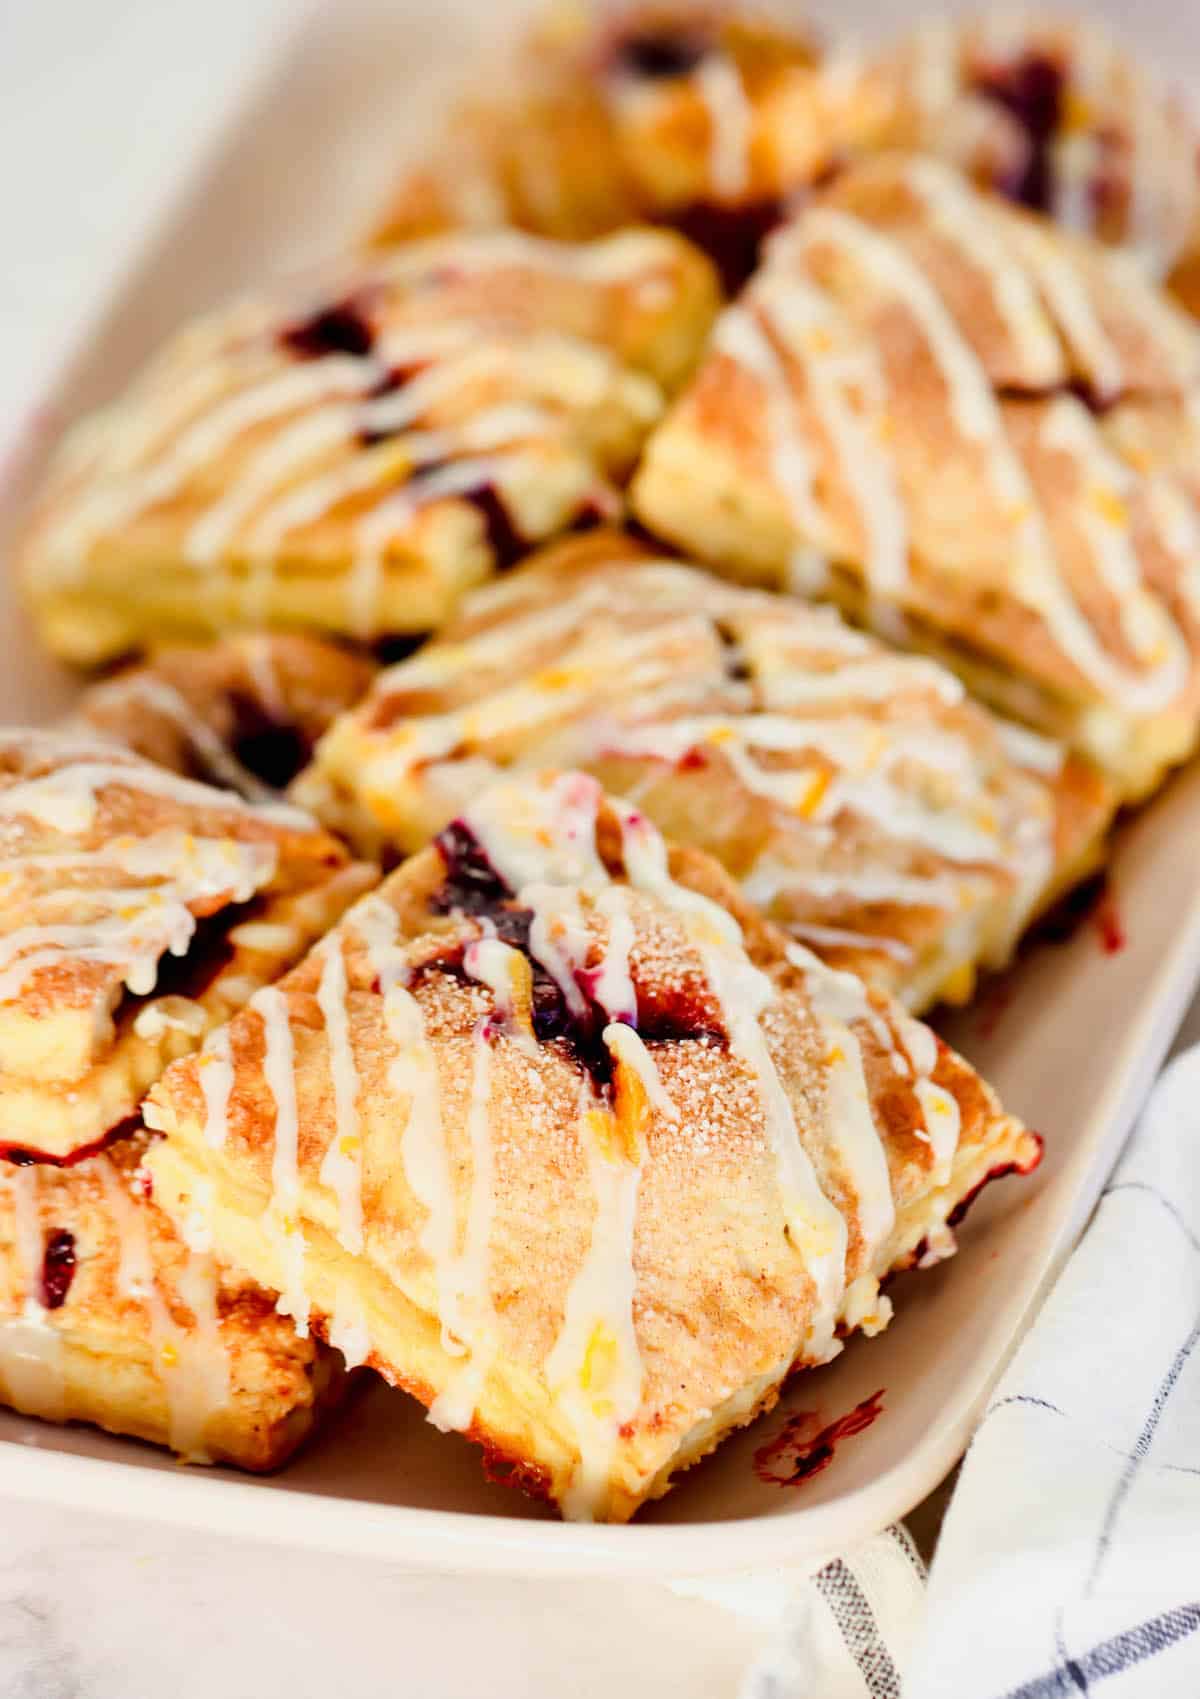 Several square blueberry hand pies drizzled with orange glaze